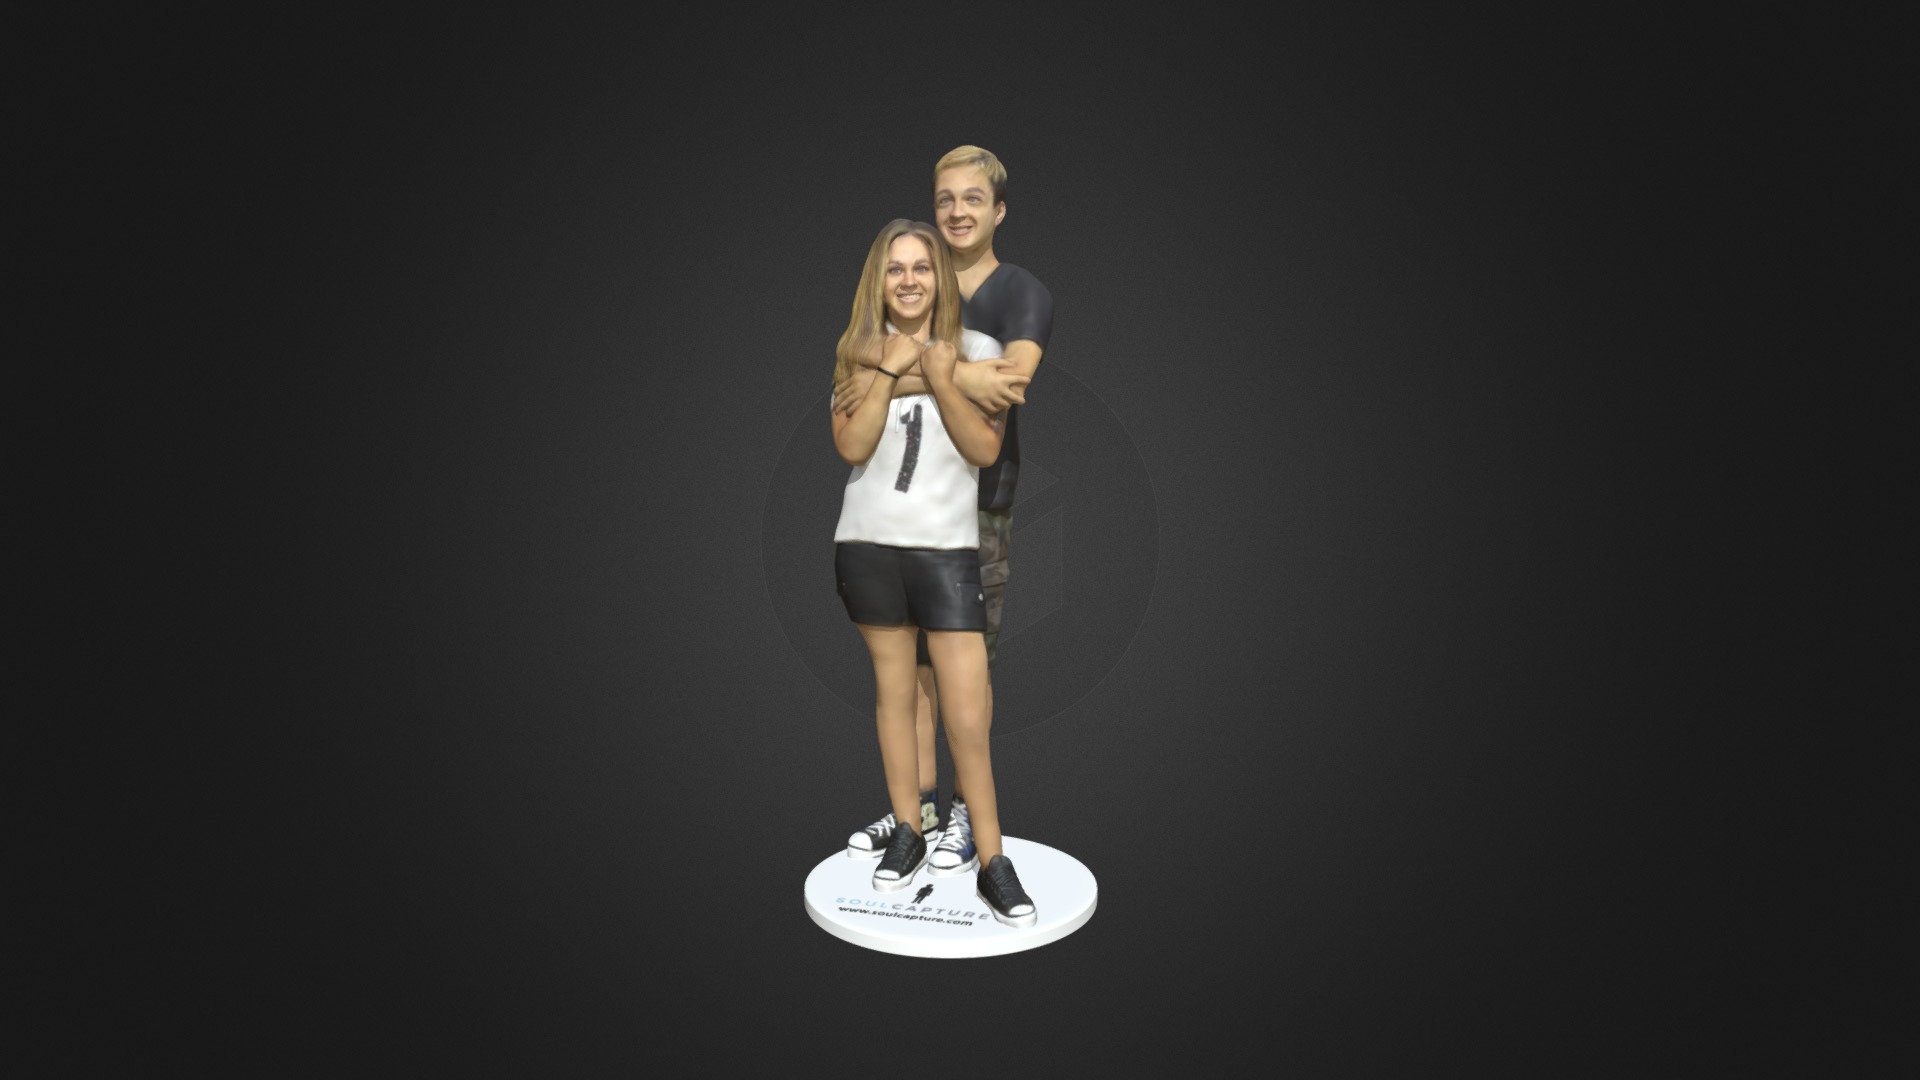 3D model Lacey - This is a 3D model of the Lacey. The 3D model is about a man and woman posing for a picture.